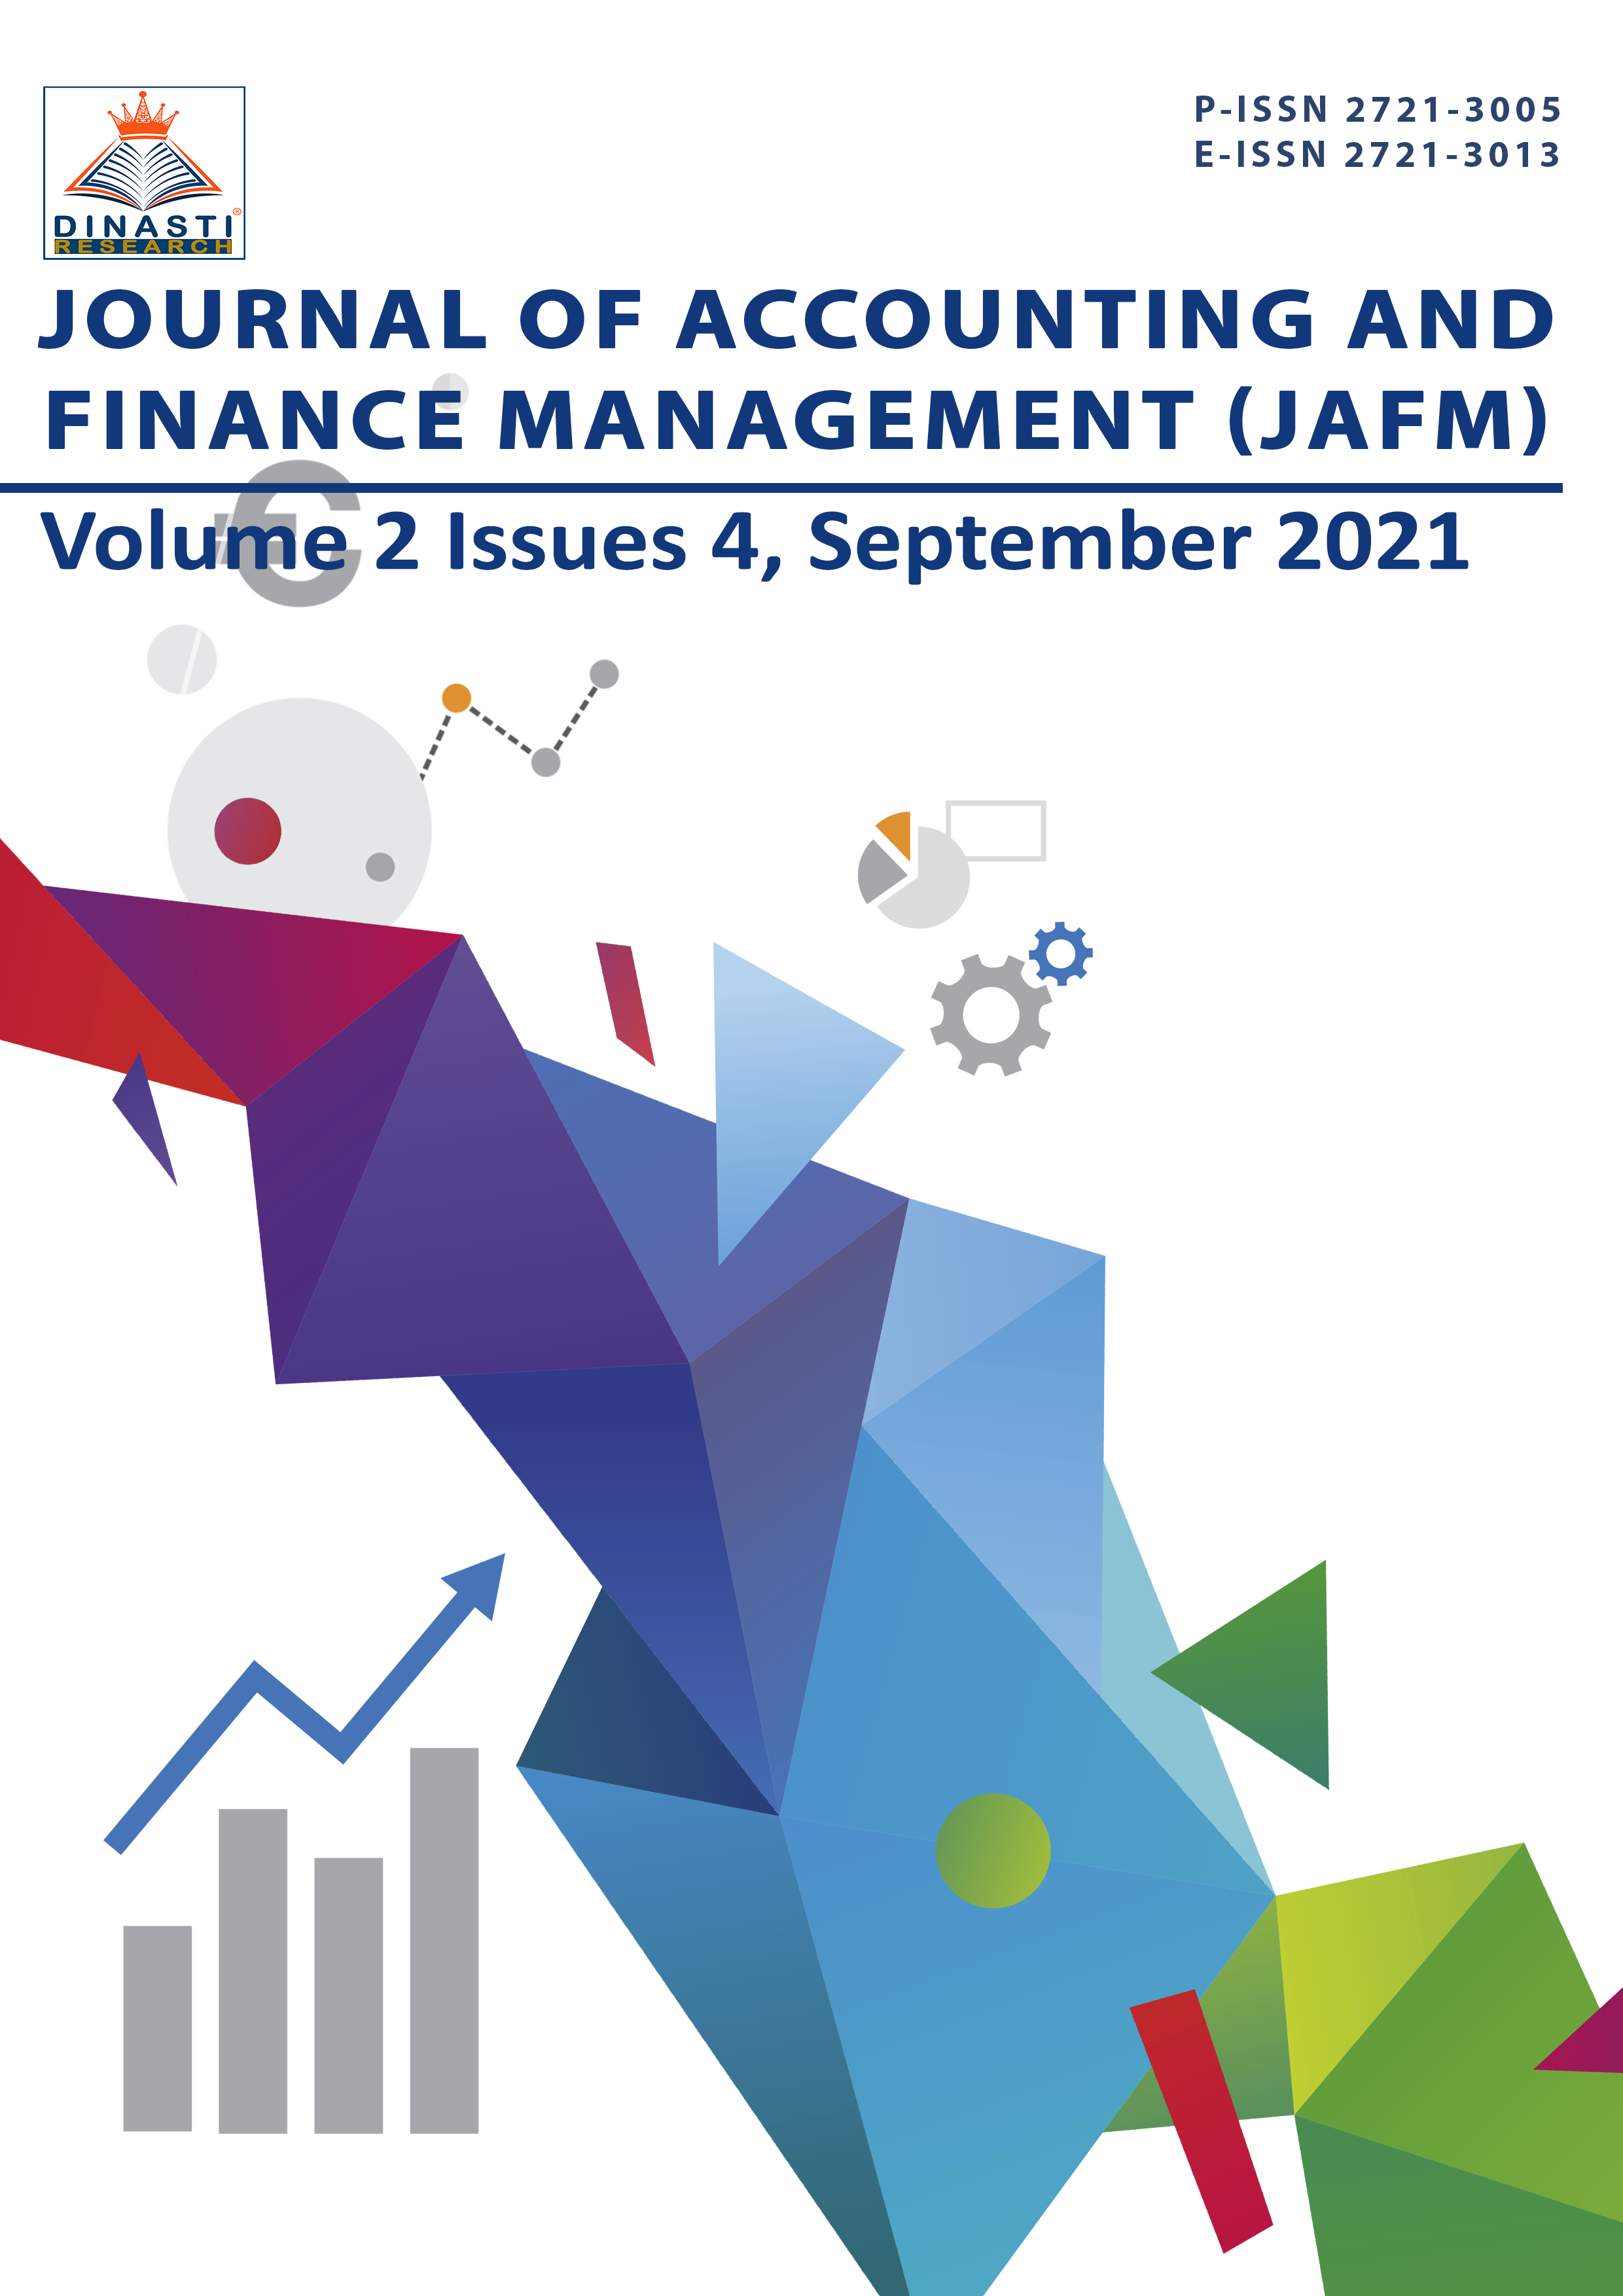 					View Vol. 2 No. 4 (2021): Journal of Accounting and Finance Management (September-October 2021)
				